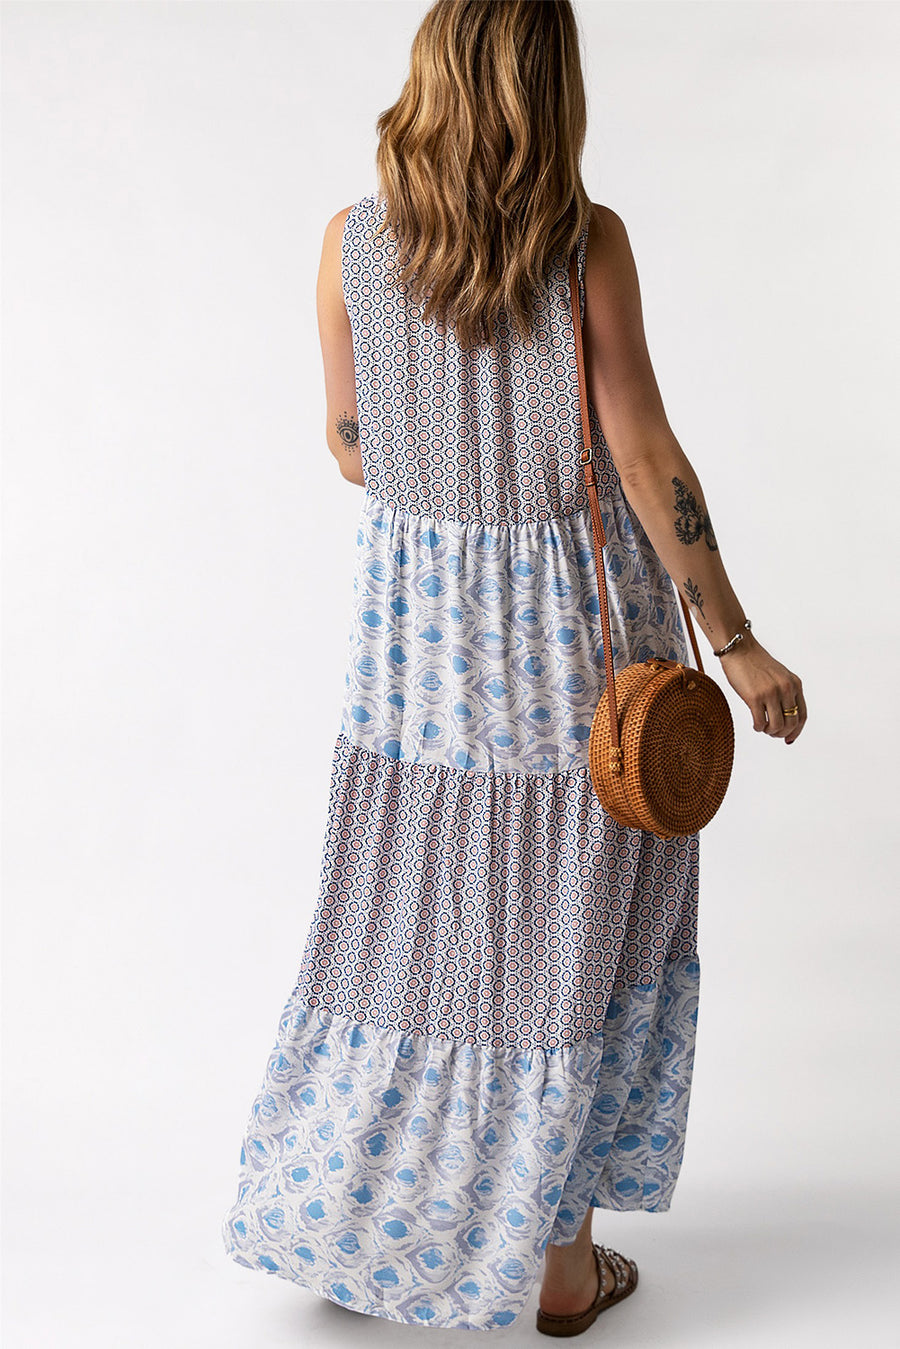 In The Mix Maxi Dress